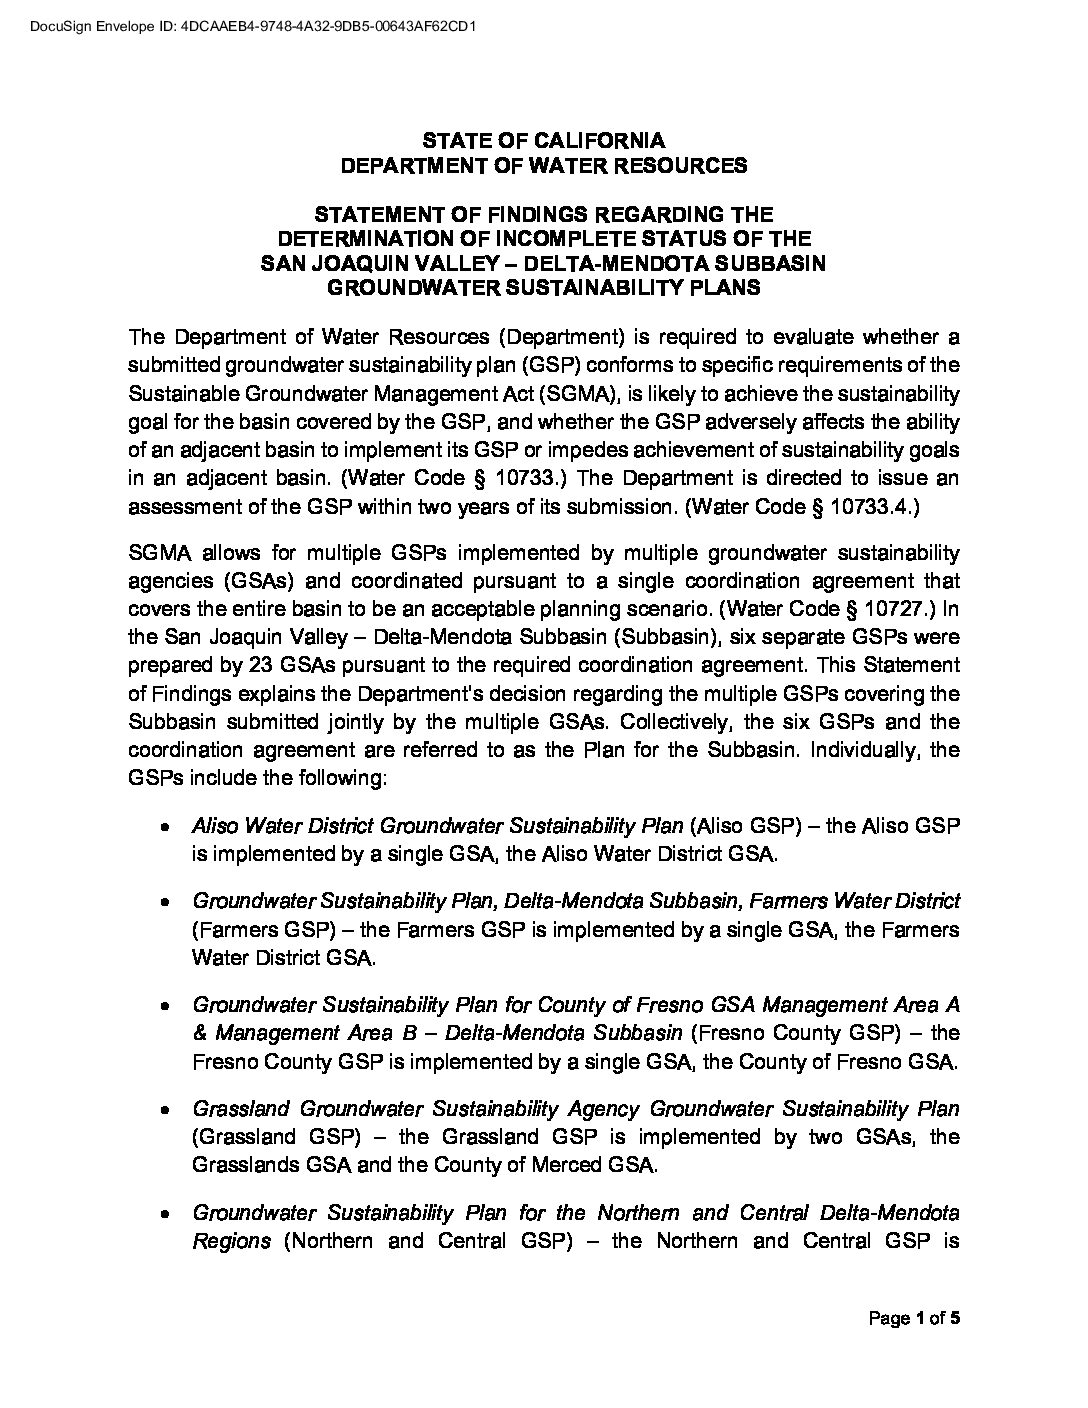 Statement of Findings regarding the Determination of Incomplete Status of the San Joaquin Valley – Delta-Mendota Subbasin Groundwater Sustainability Plans